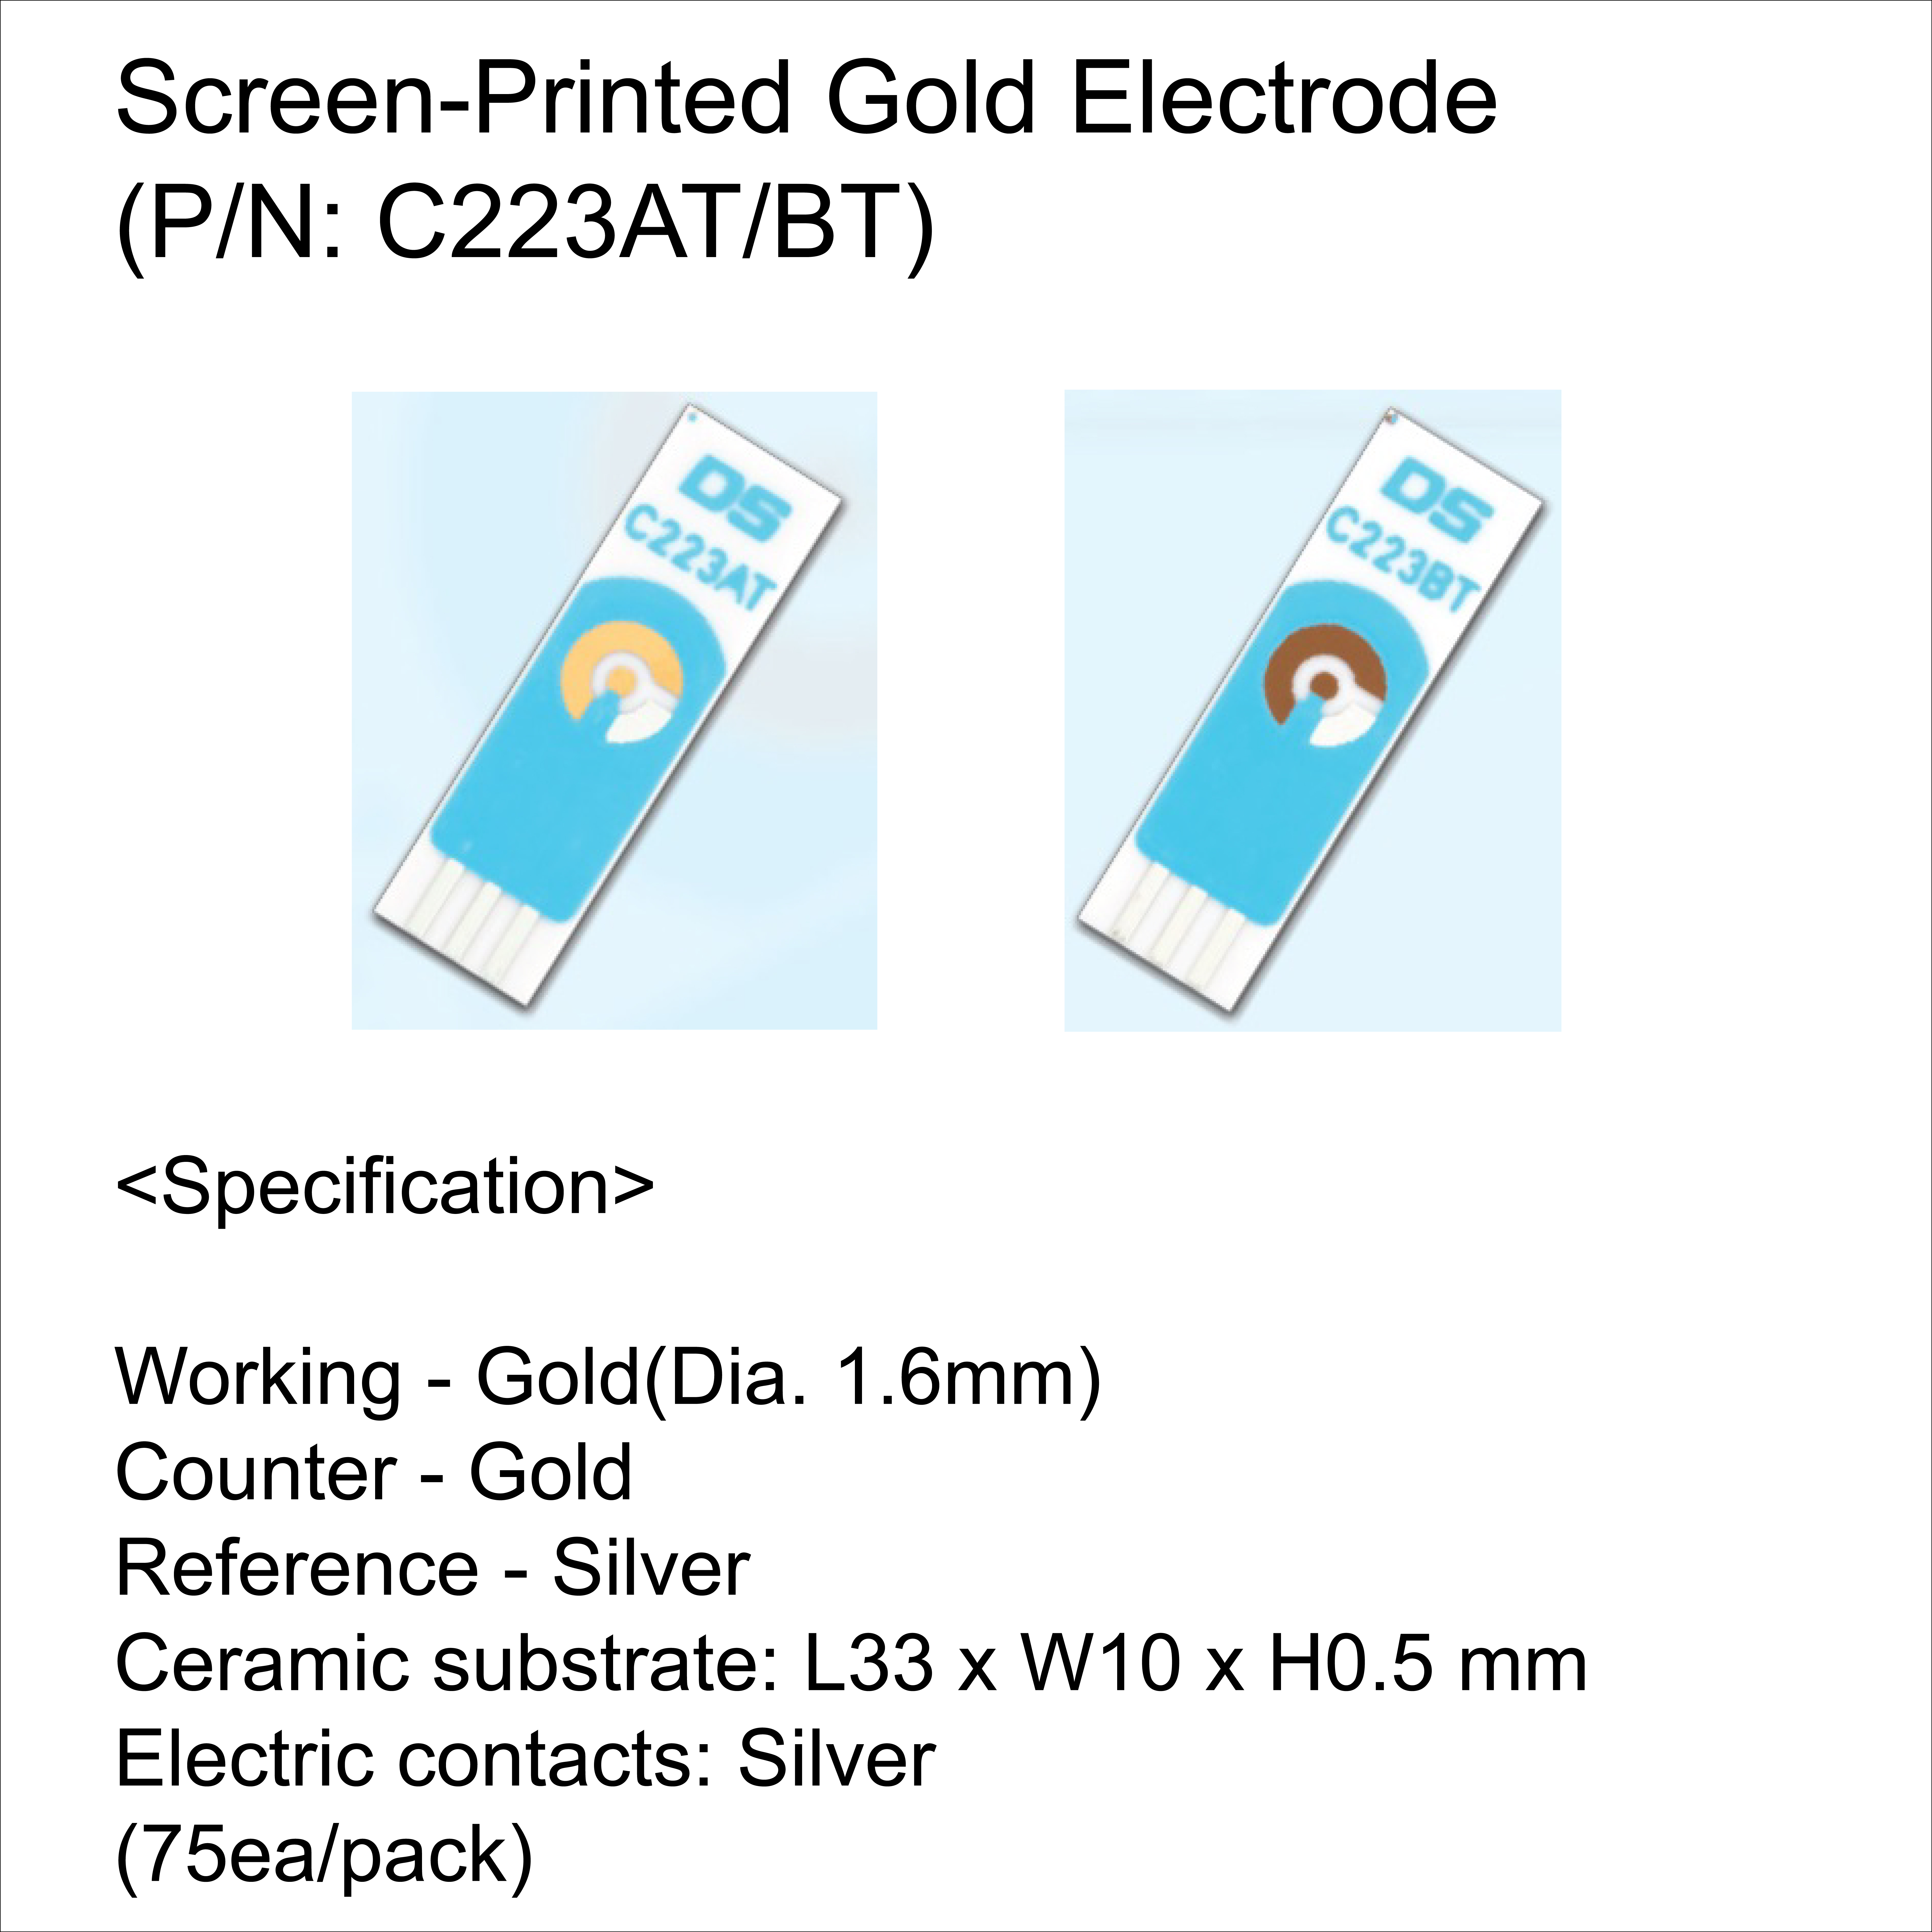 Screen-Printed Gold Electrode(W Dia. 1.6mm)